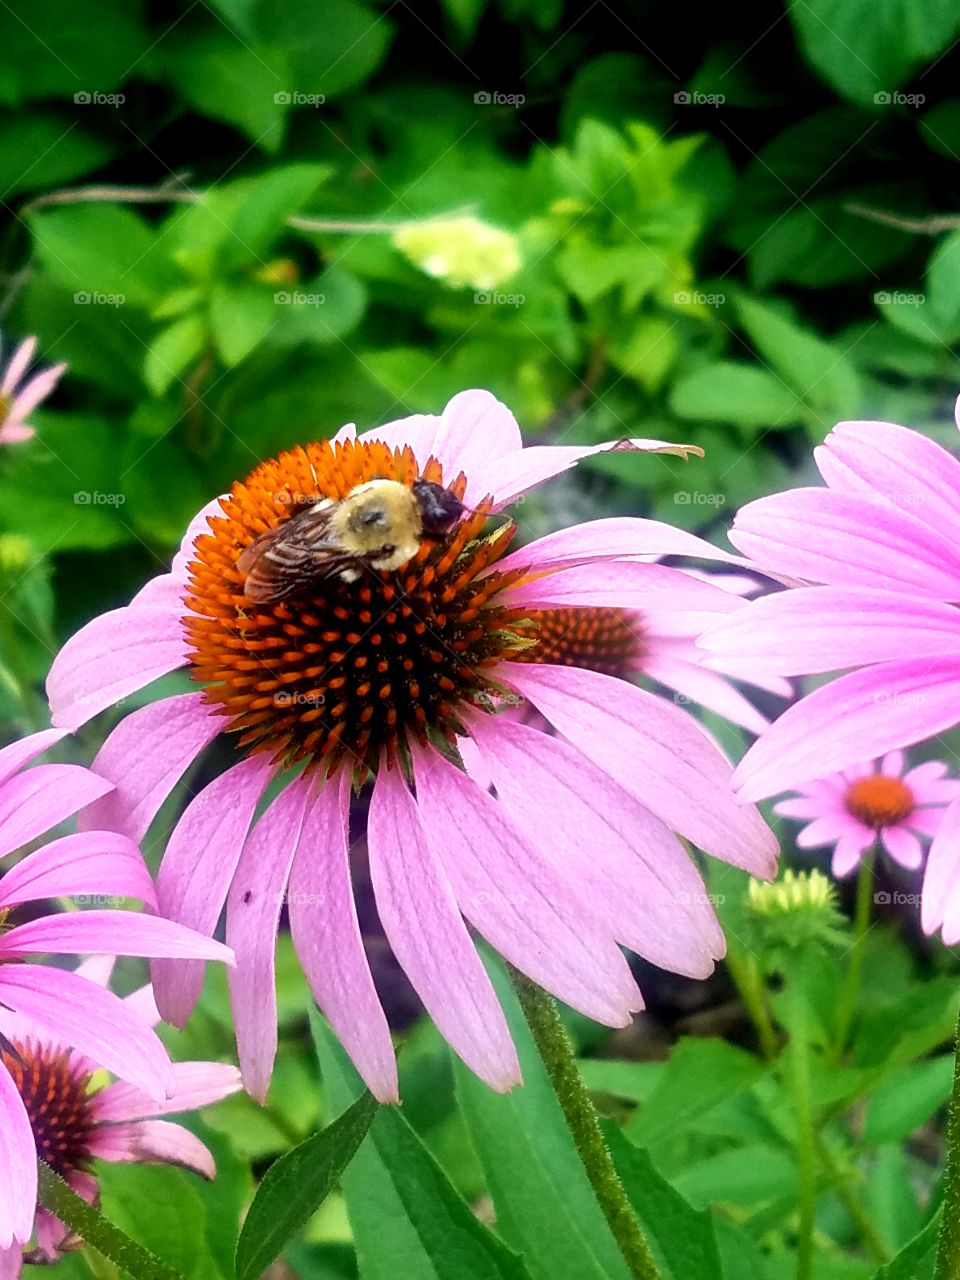 Bumble Bee on a Pink Cone Flower